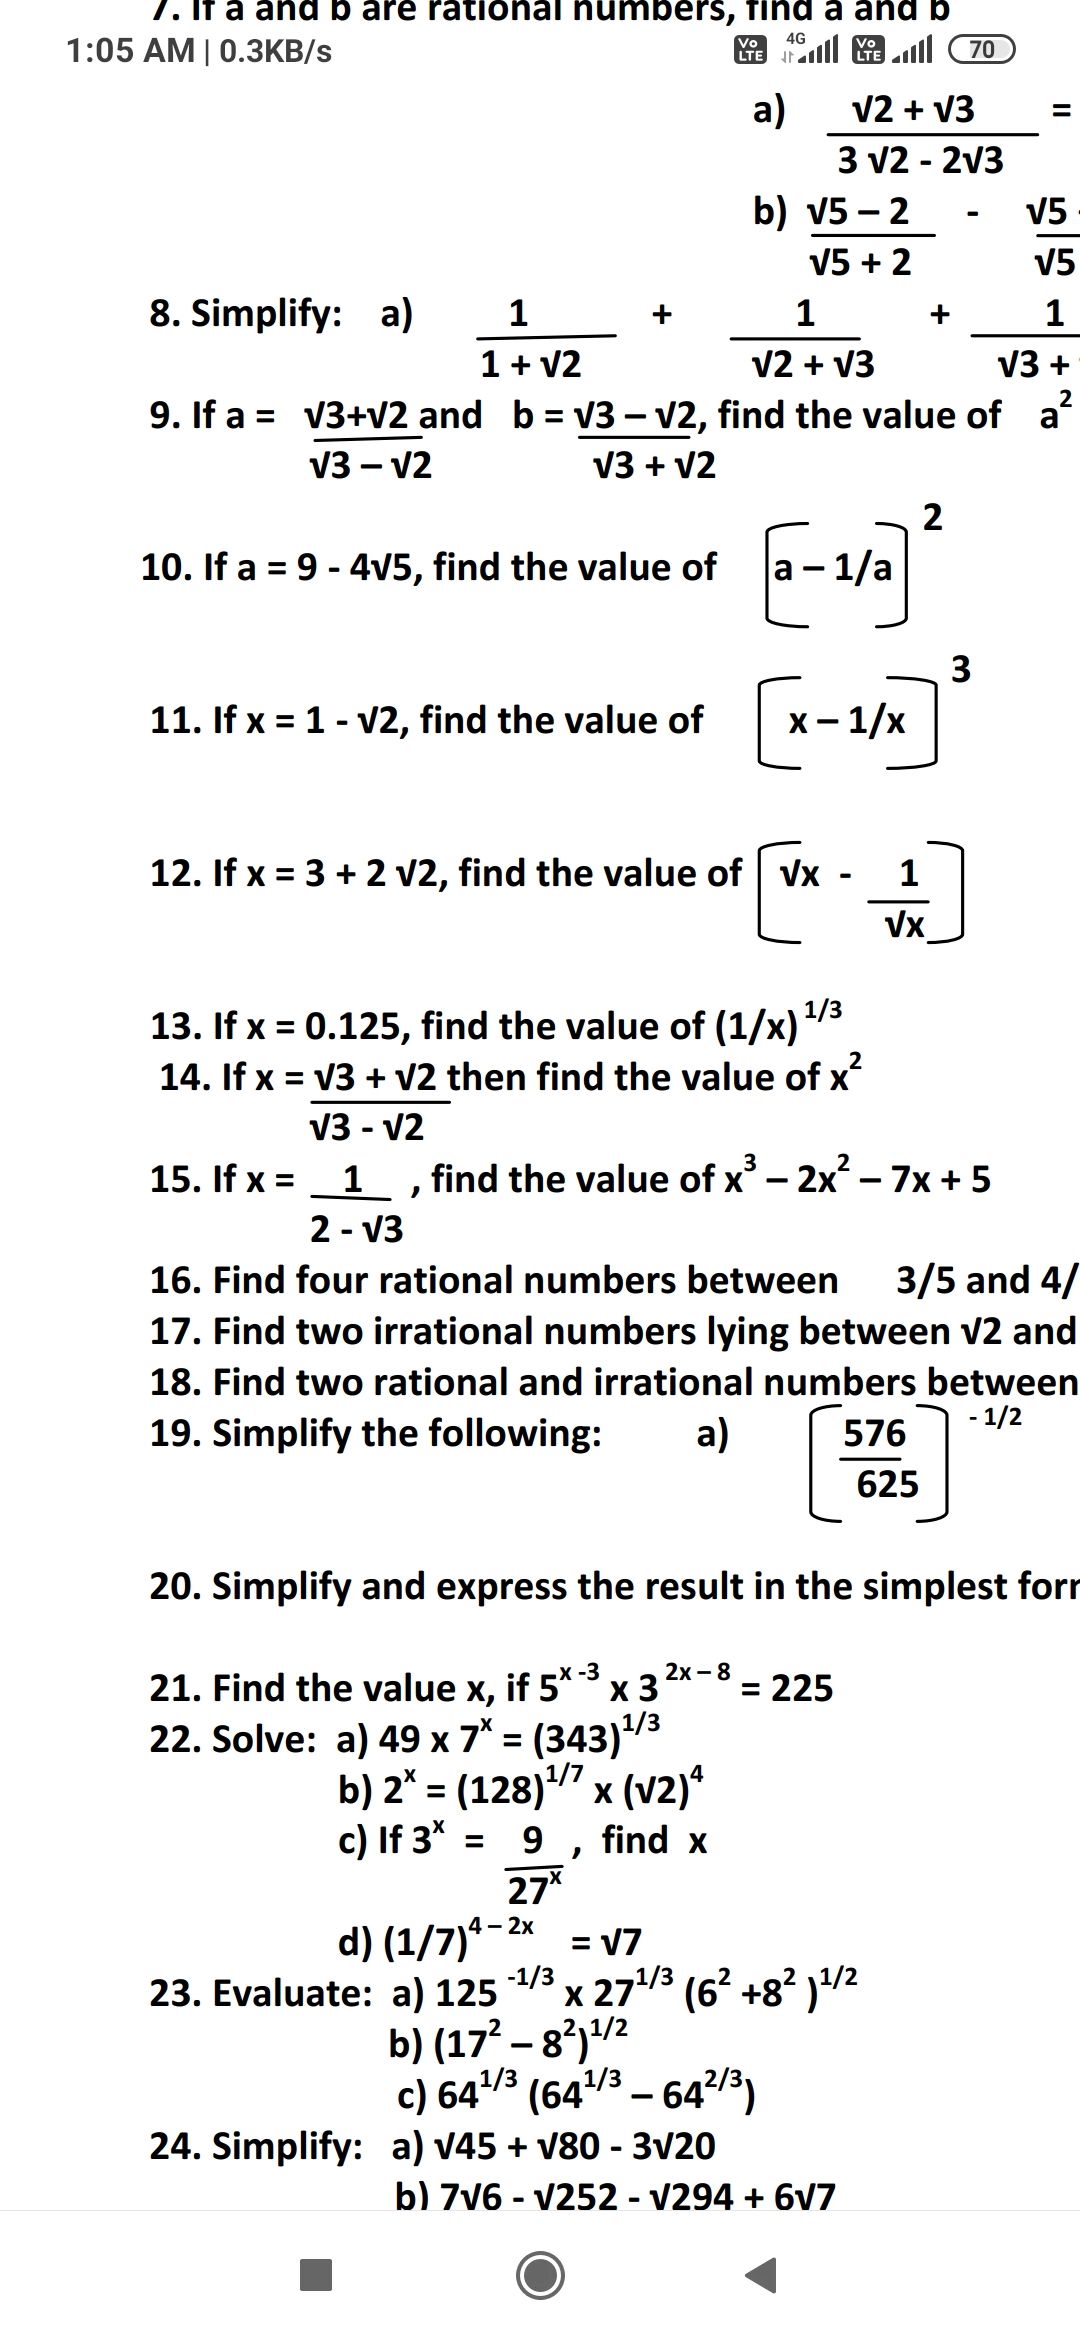 Irrational Numbers Number System Notes Questions Answers For CBSE Class 9 TopperLearning